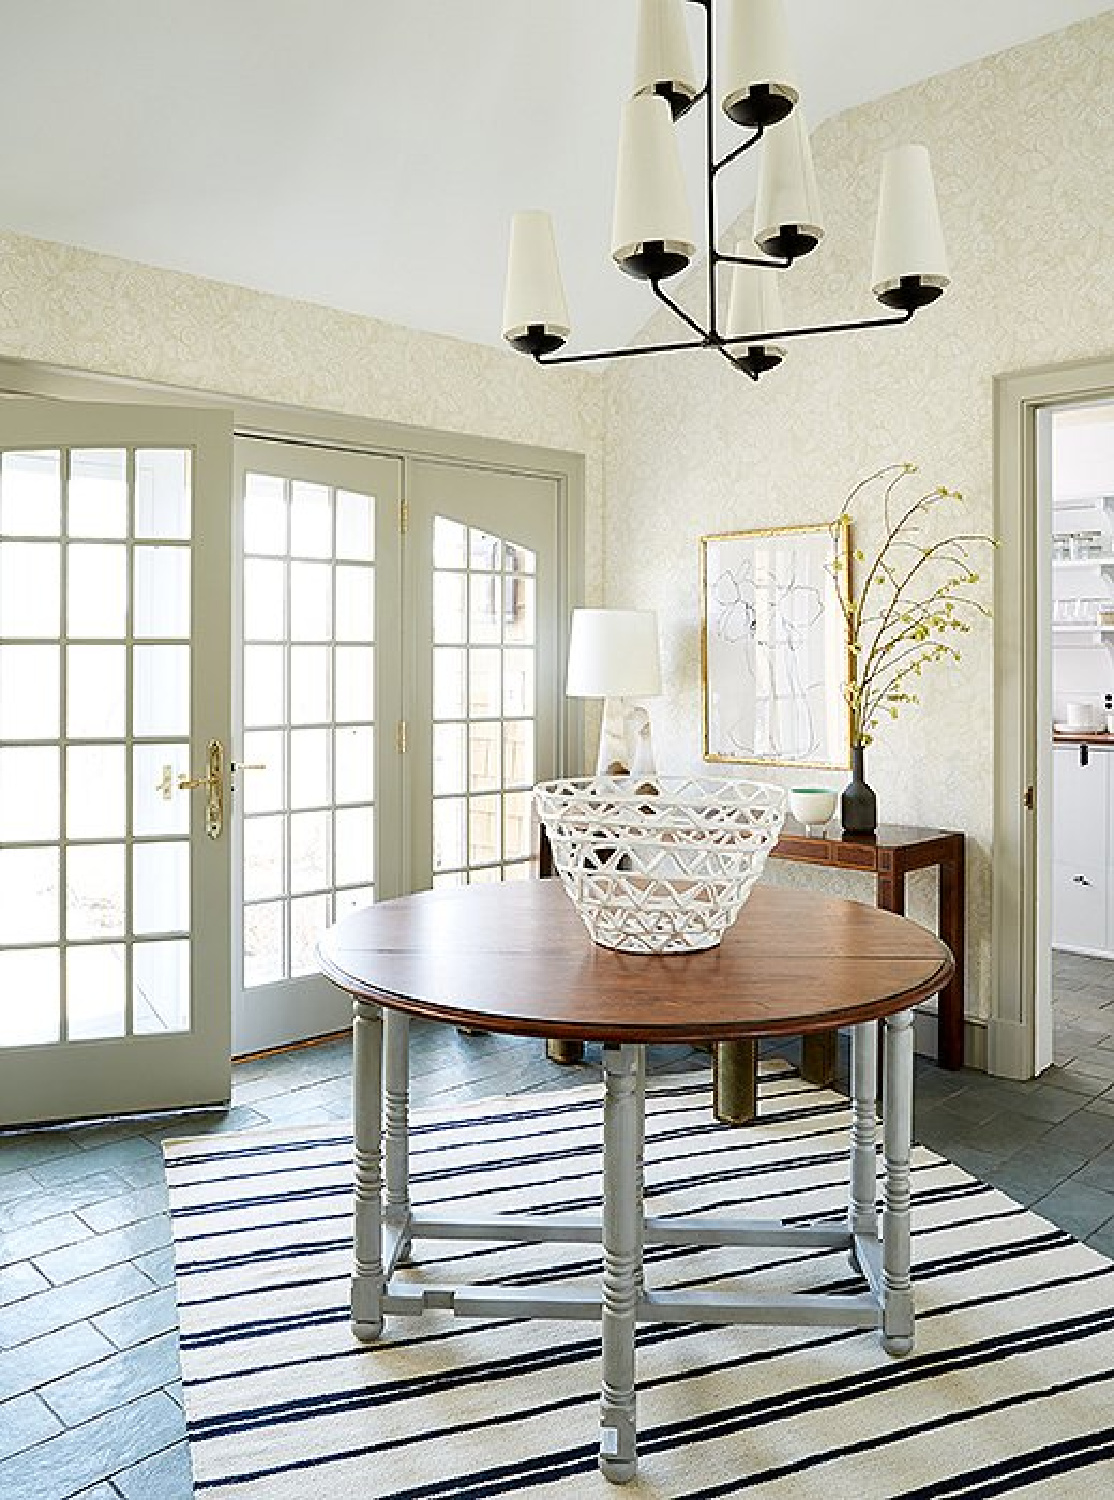 Beautiful French doors, stripe rug, and round table with modern chandelier - OKL.